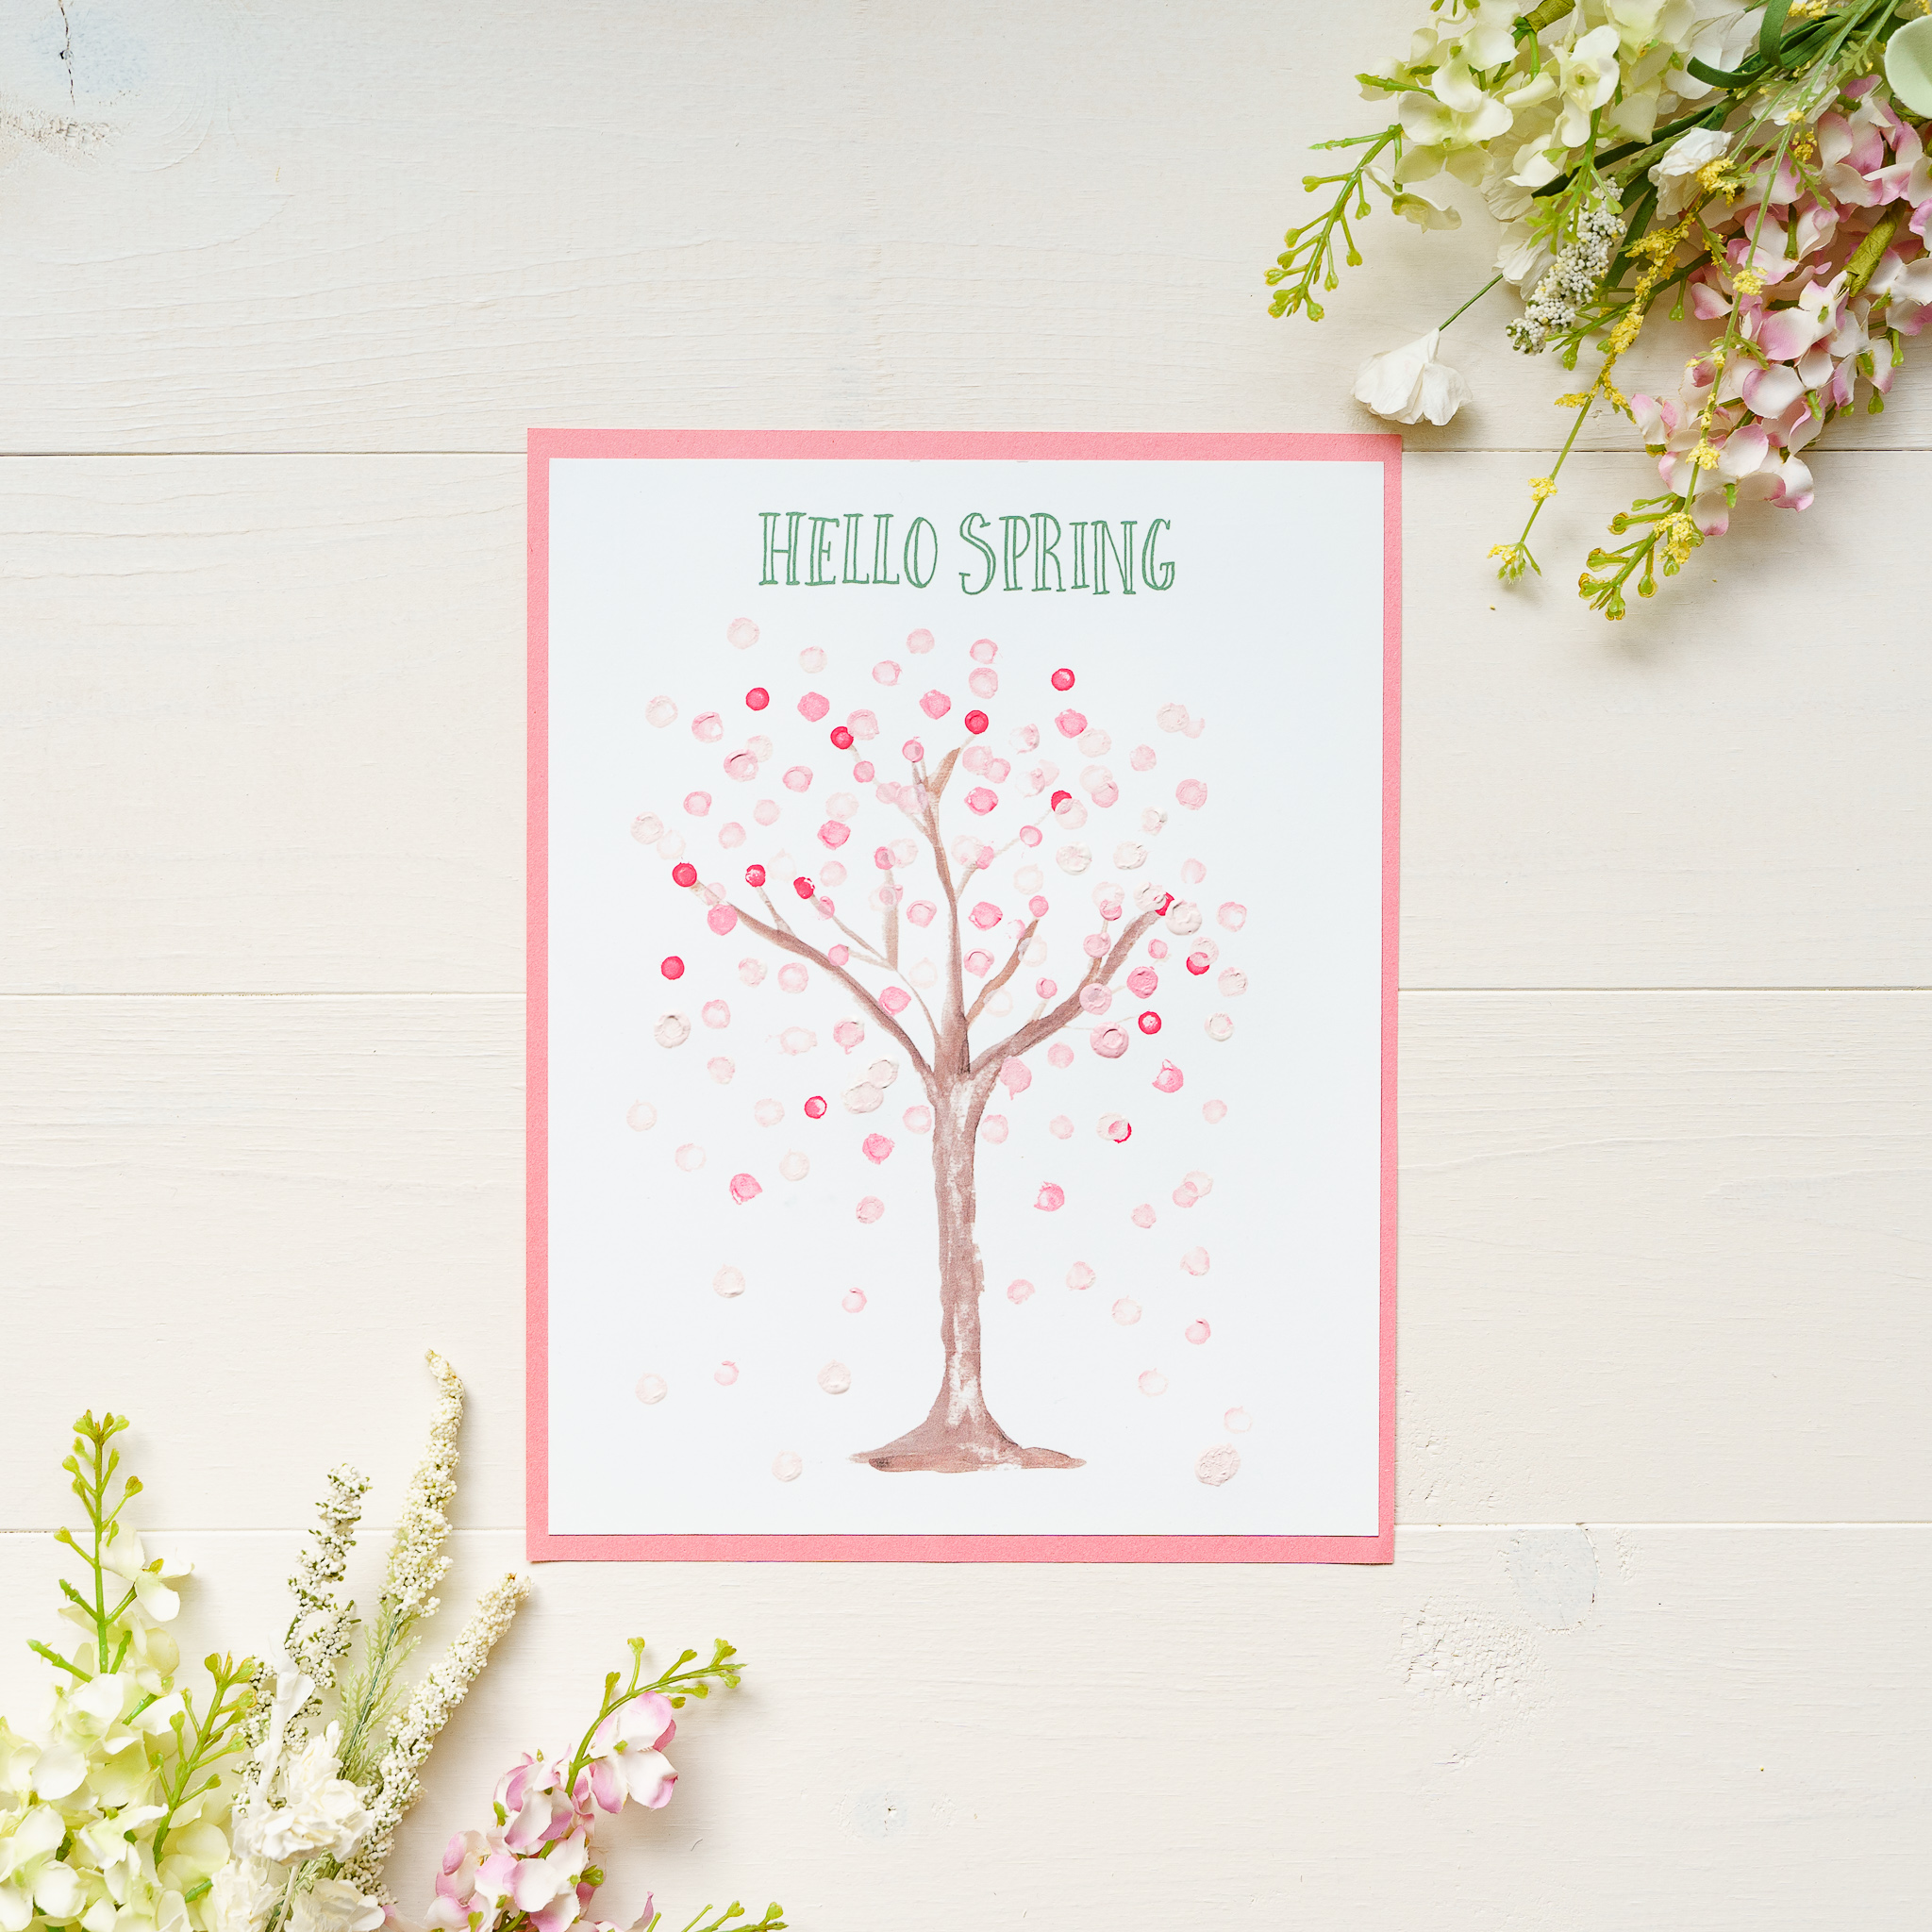 spring-tree-q-tip-painting-free-printable-craft-activity-for-kids